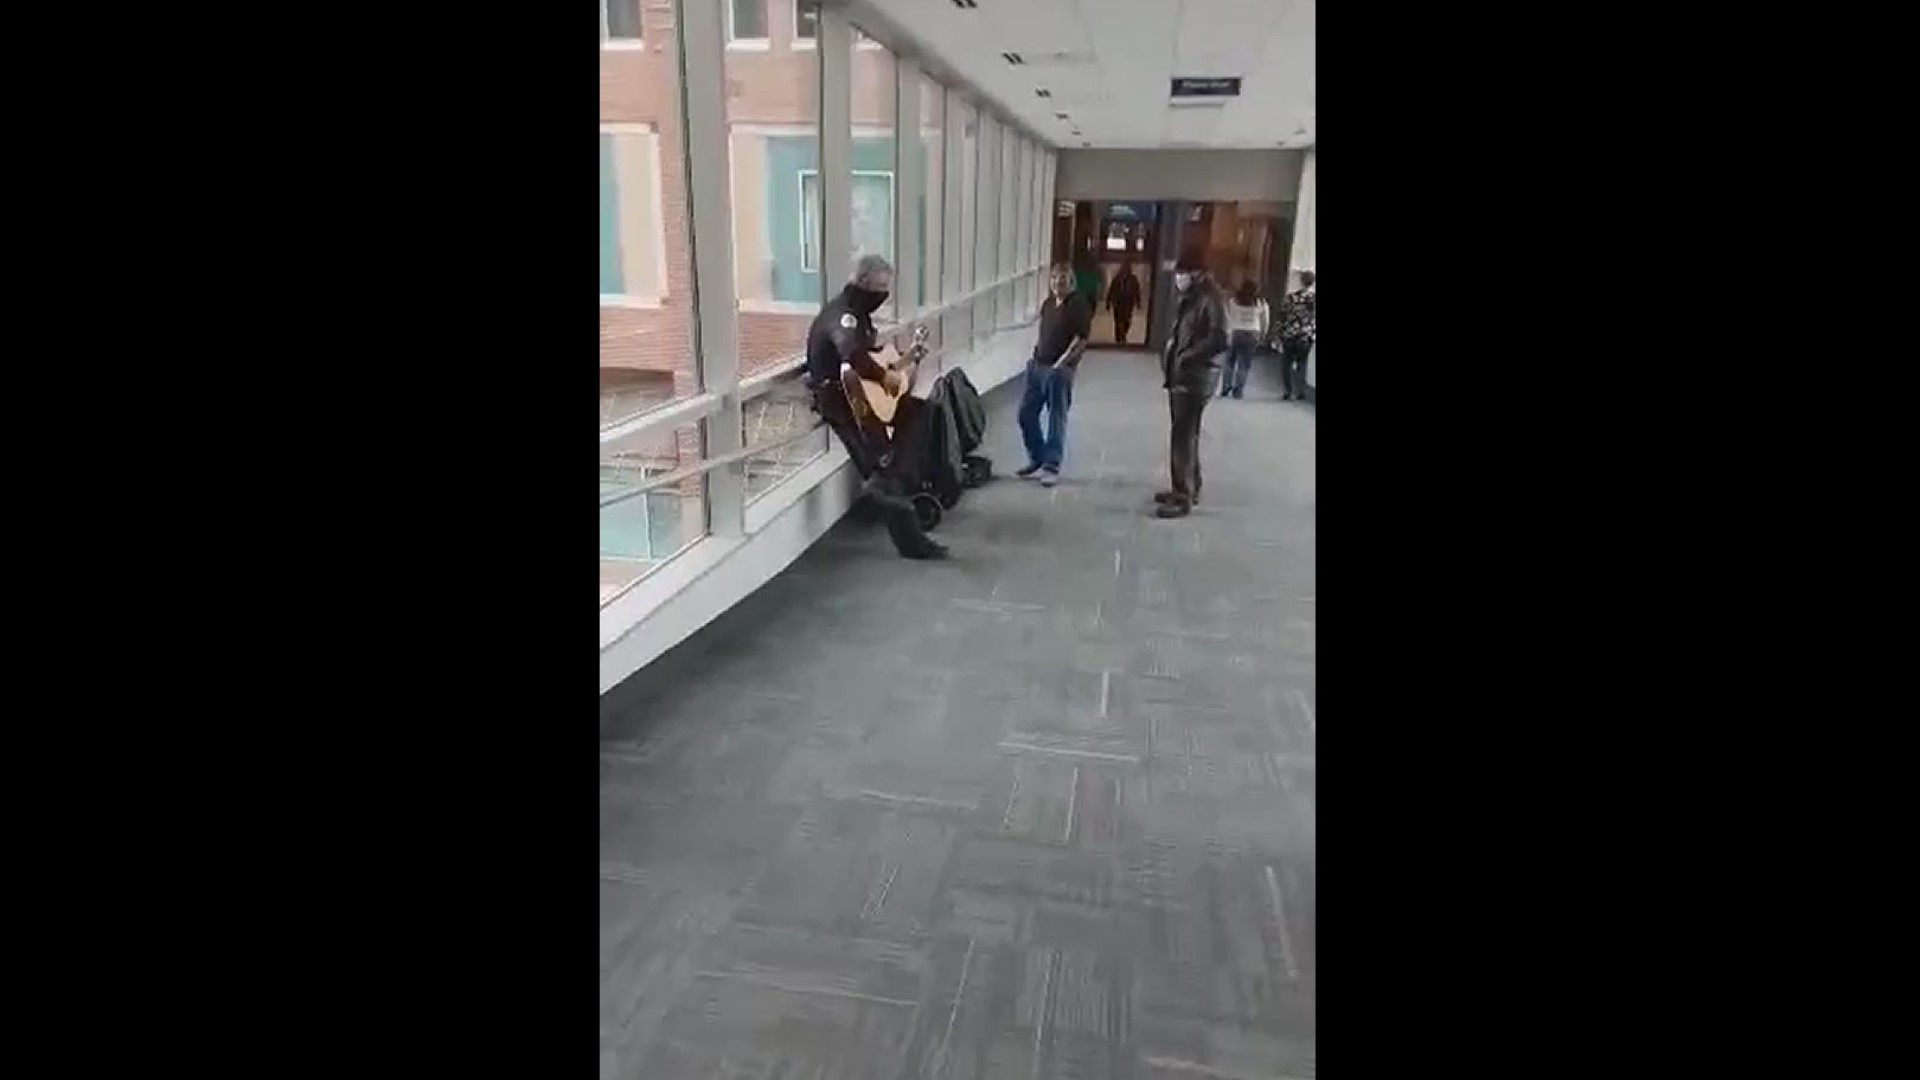 Norman Davis shared this video of a DMPD officer playing guitar and singing in the downtown skywalk Sunday, Jan. 18.